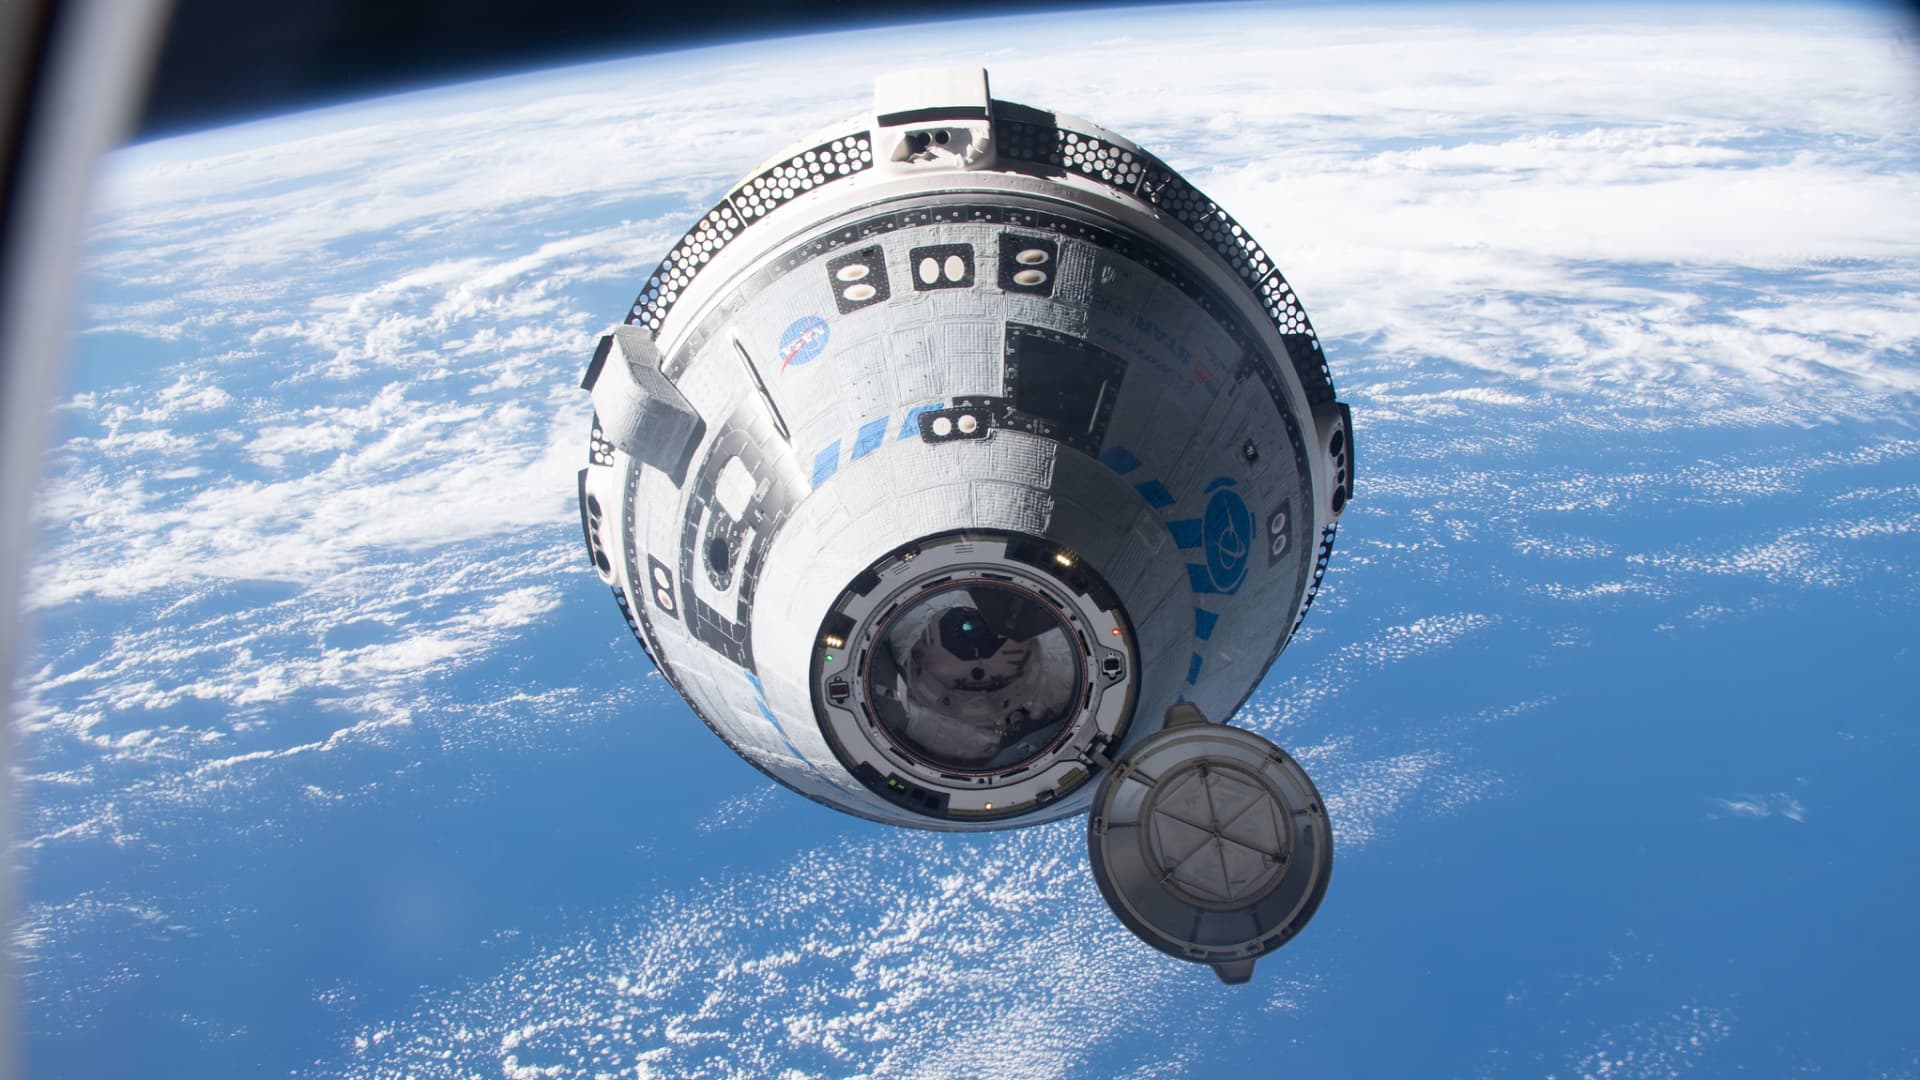 Boeing Starliner astronaut capsule charges near $700 million